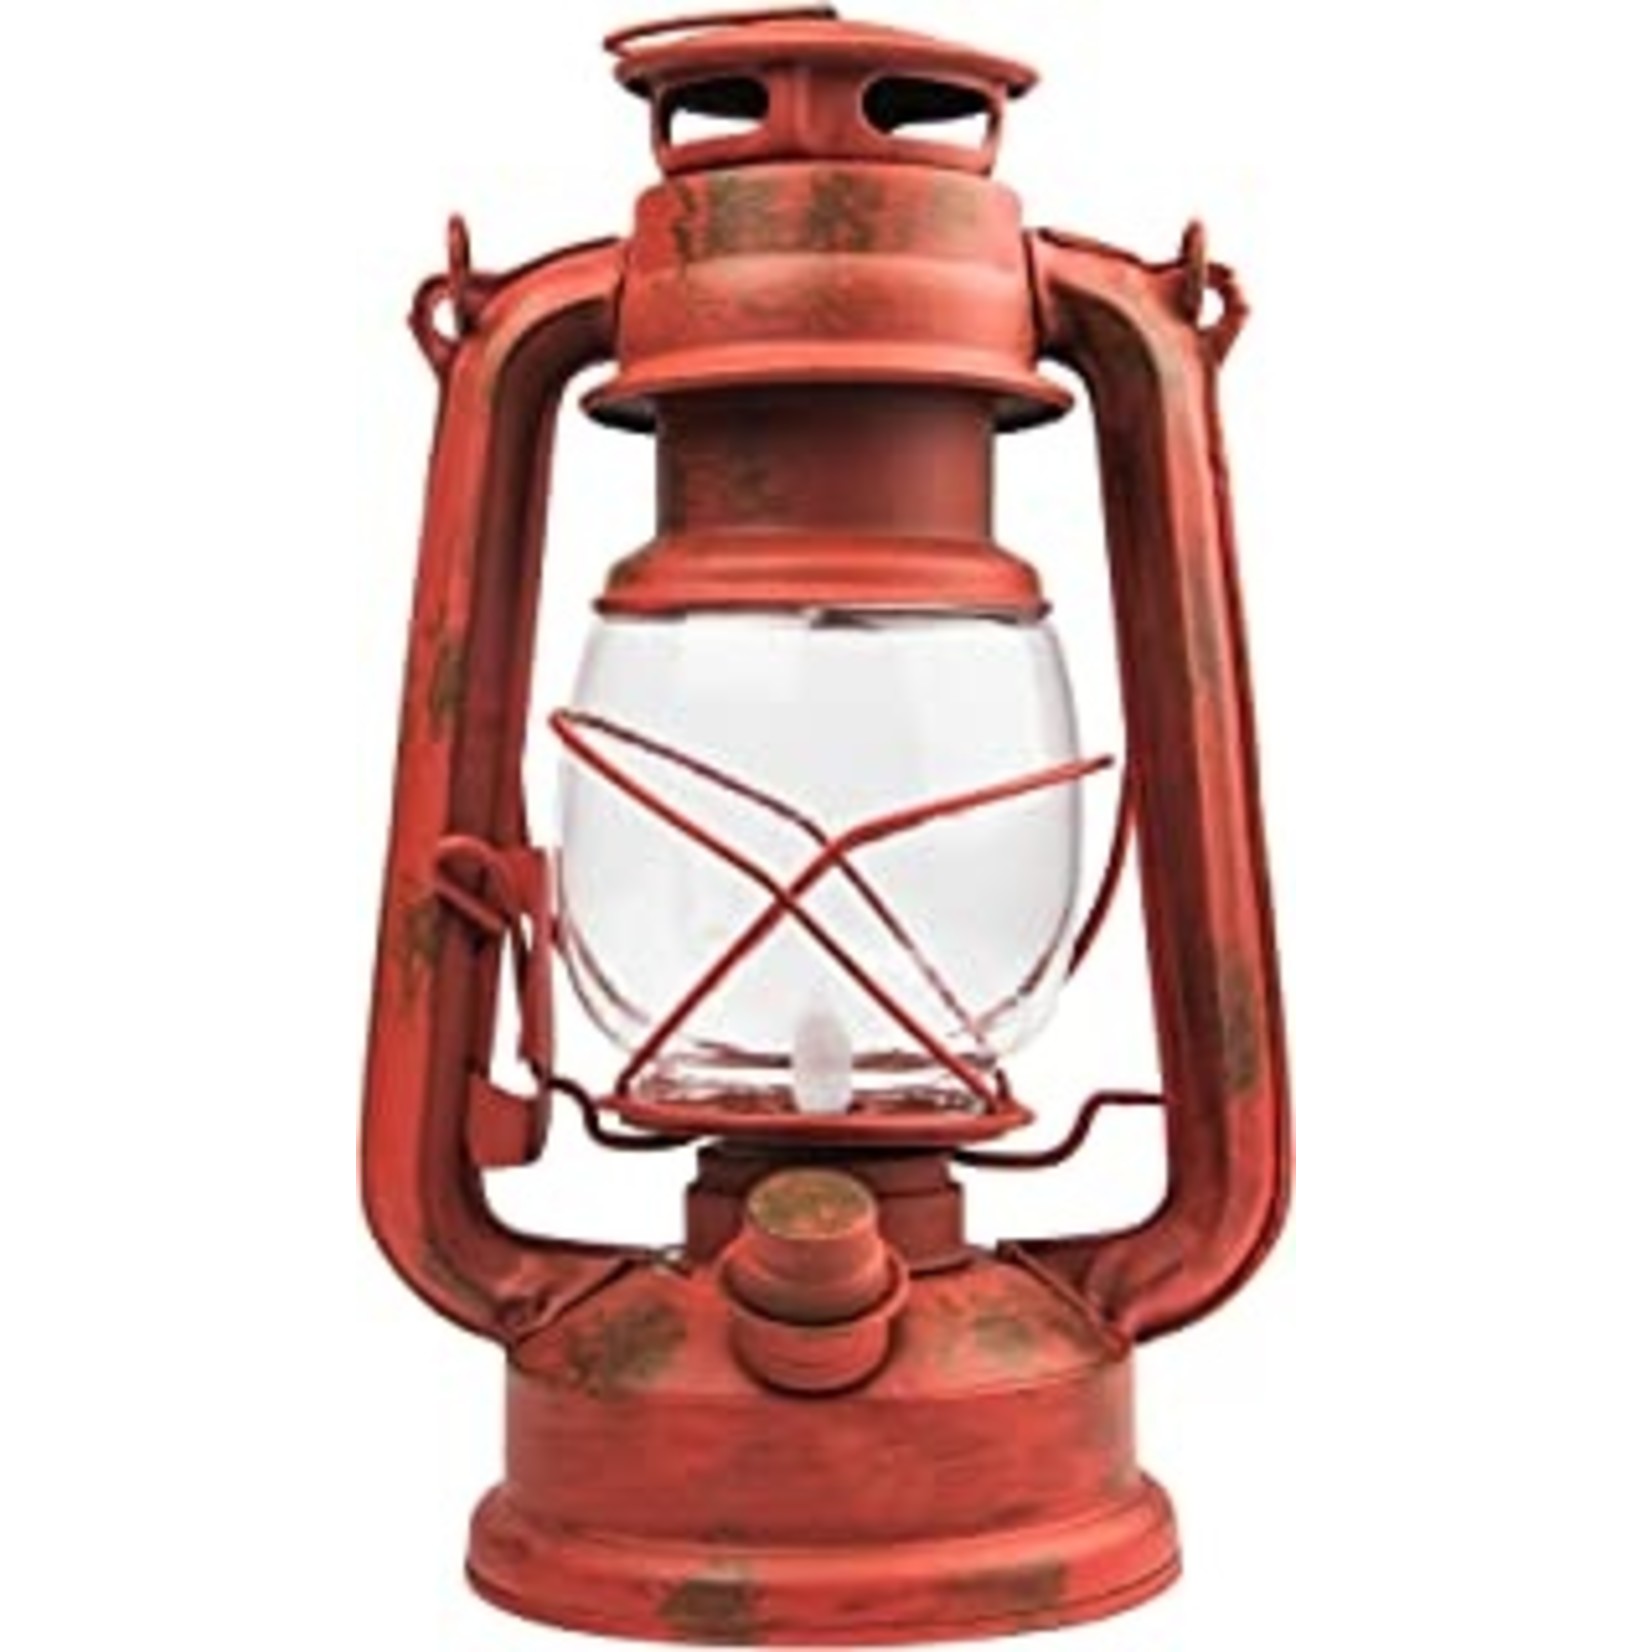 NEBO NEBO Old Red 100 Lumens LED Lantern Featuring Realistic Flickering Flame